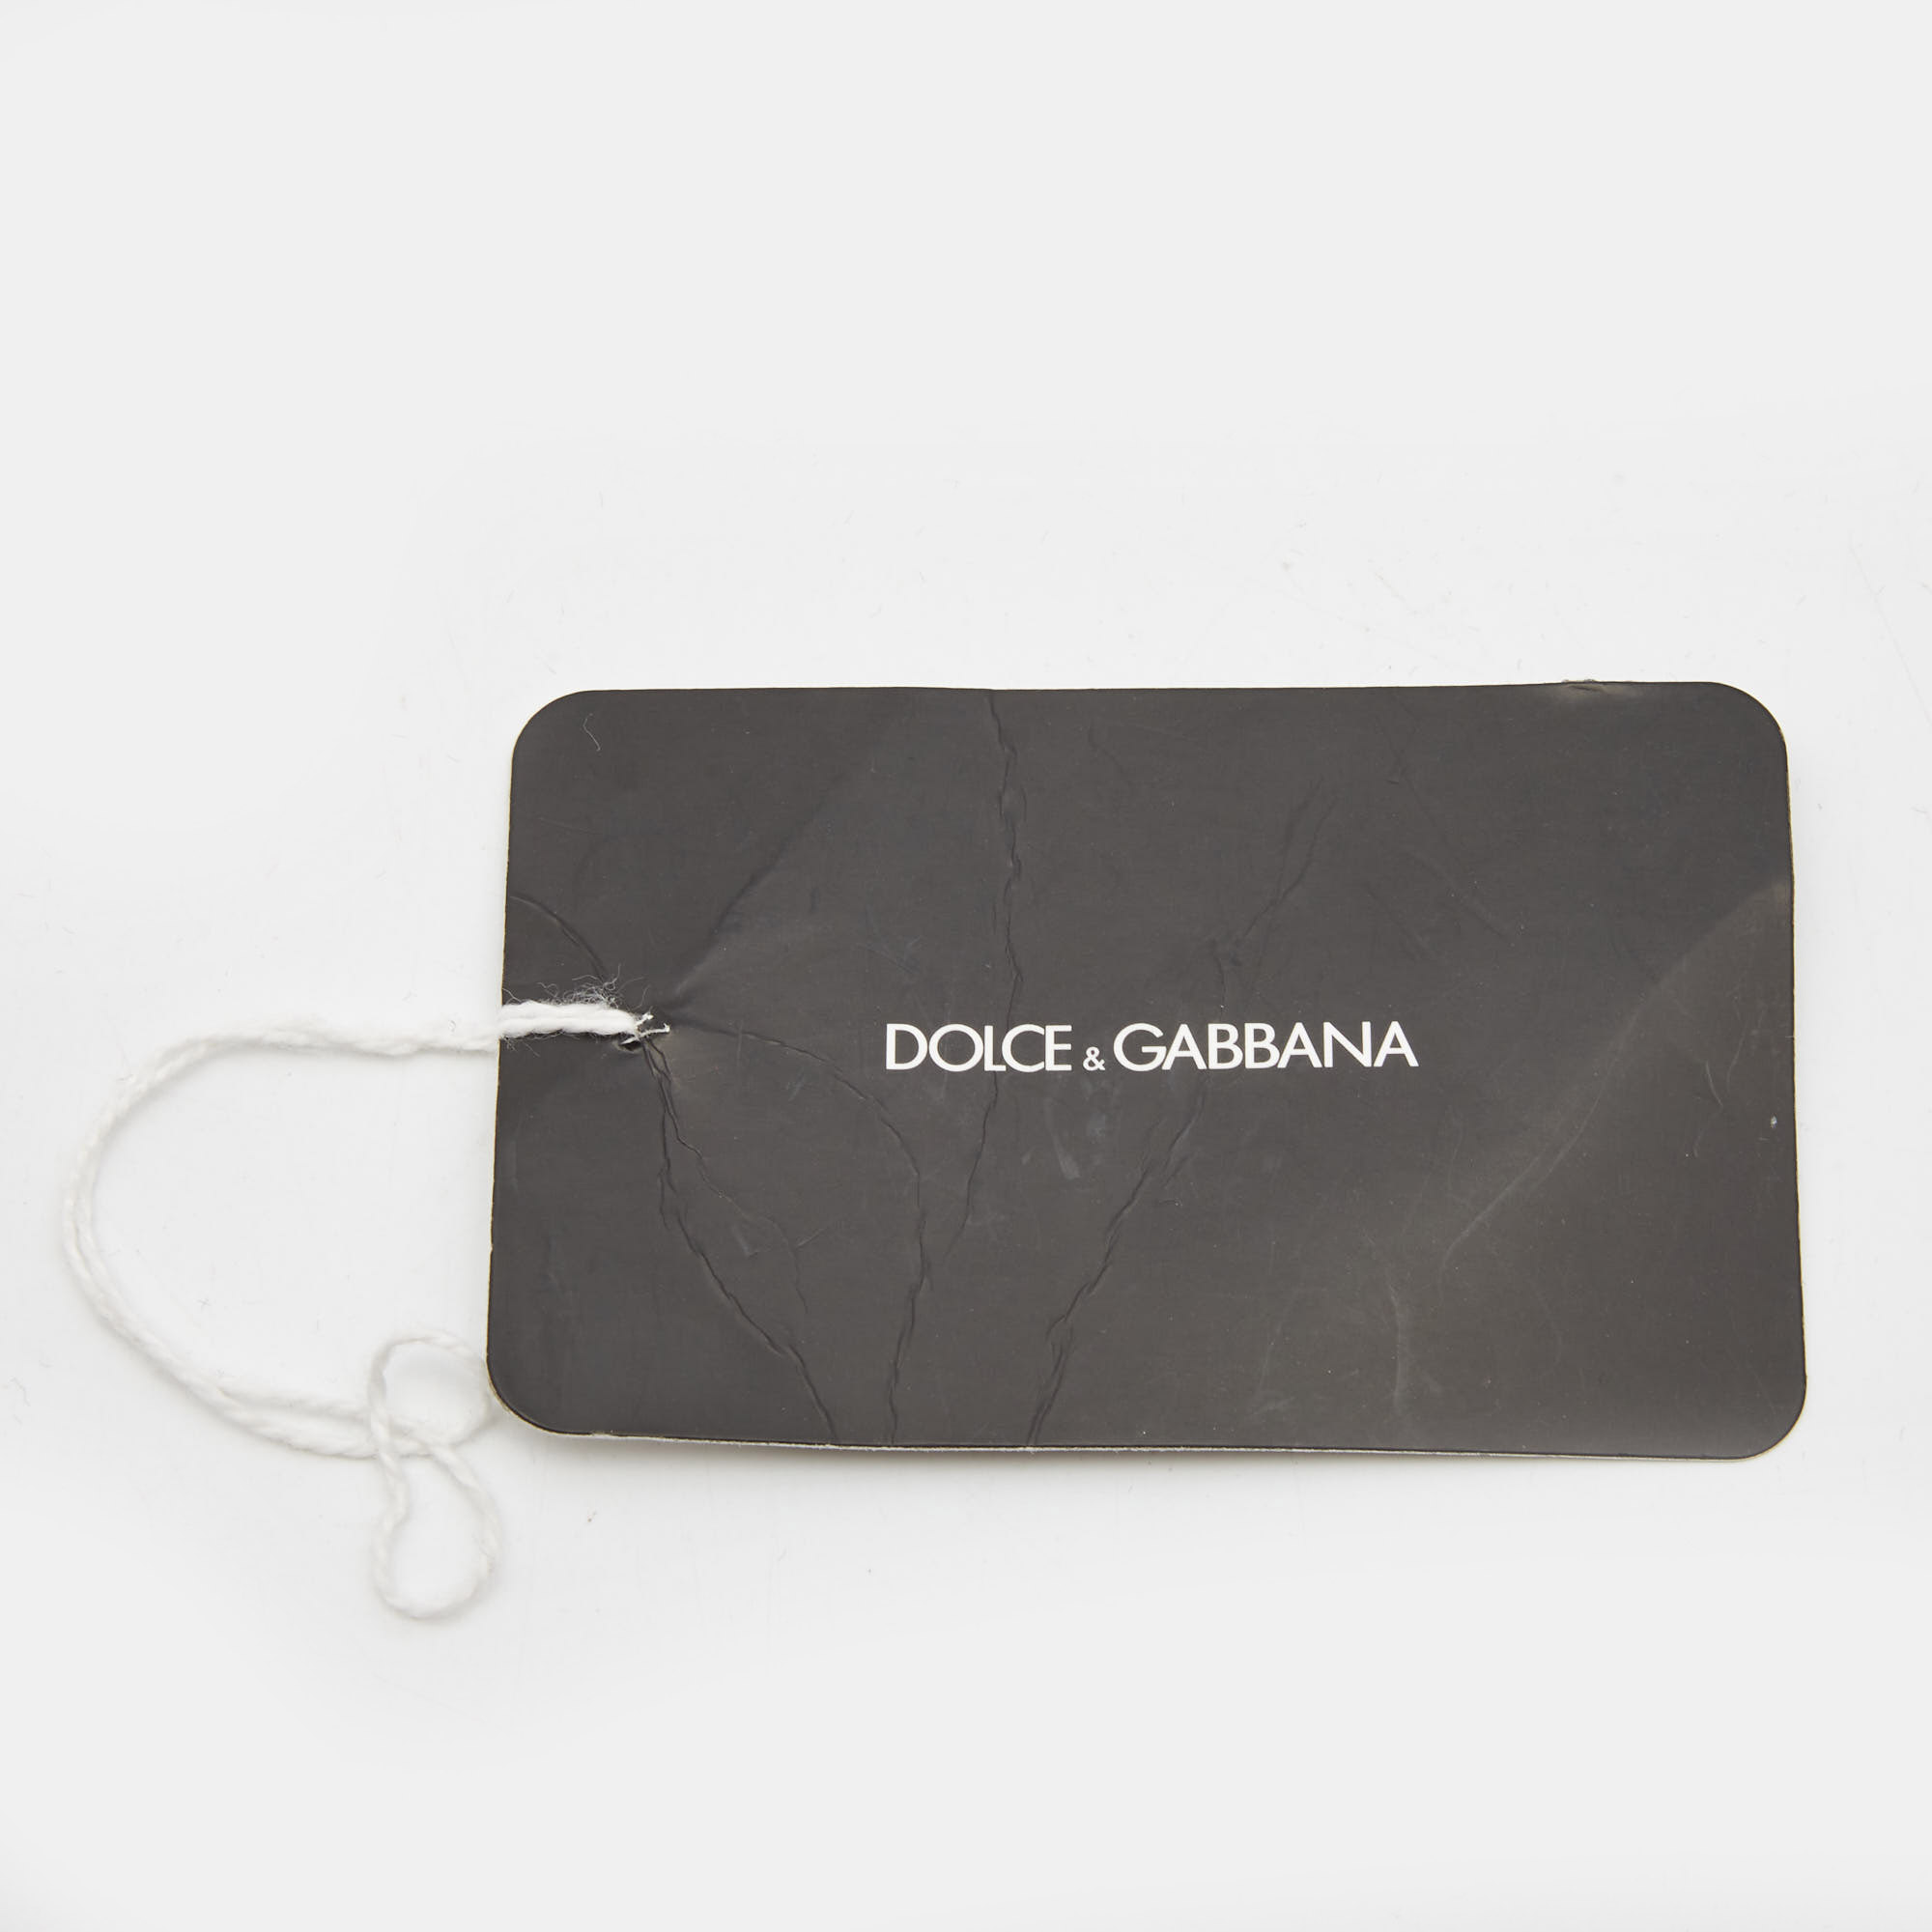 Dolce & Gabbana Pink/Black Pineapple Print Leather Phone Cover